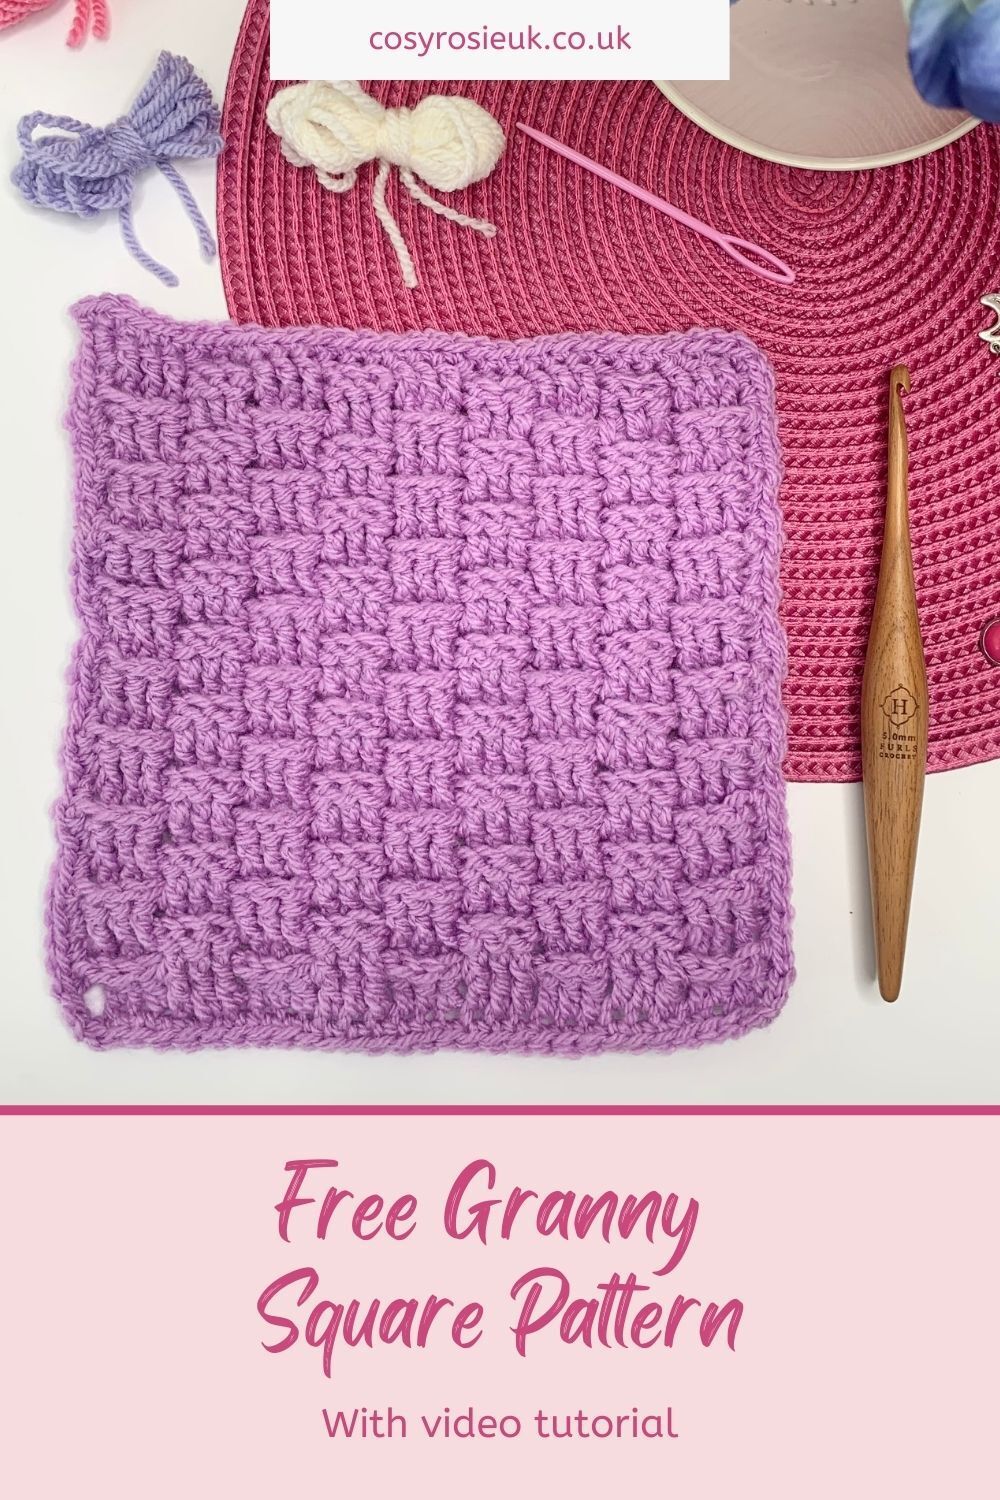 How to crochet the Basketweave Stitch